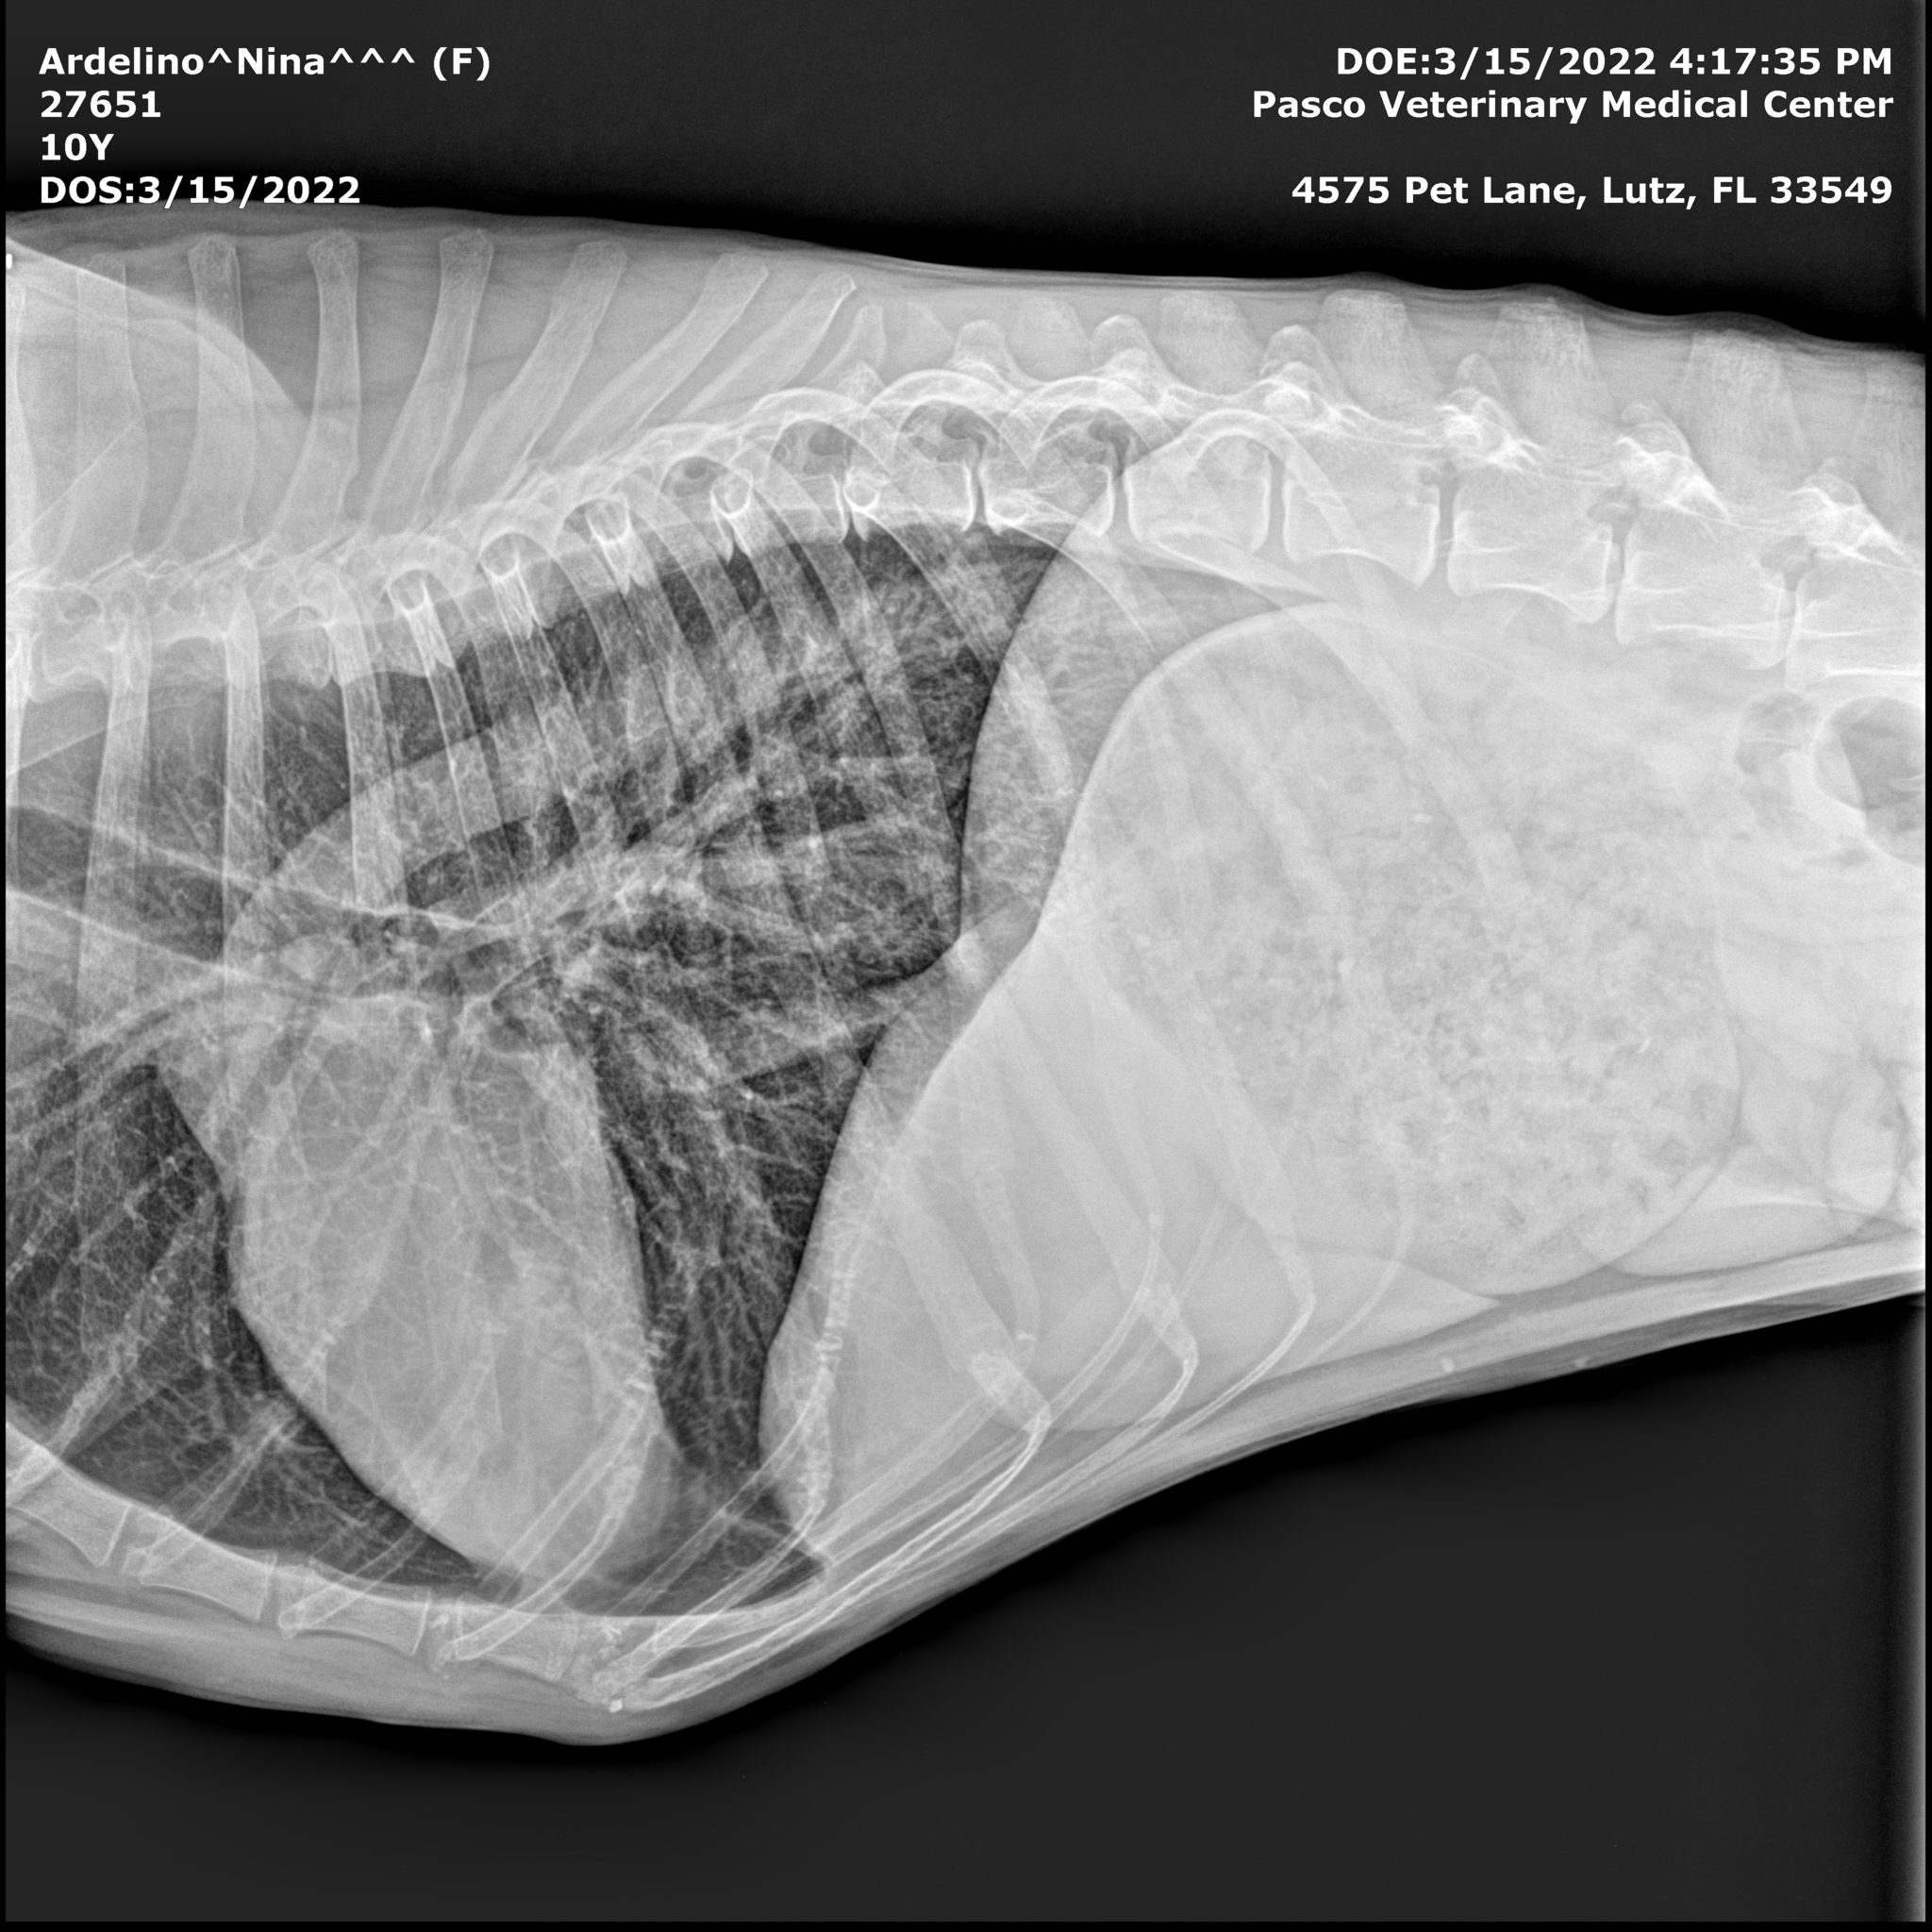 chest xray of nina 22 months post osteosarcoma in dogs diagnosis of bone cancer in dogs